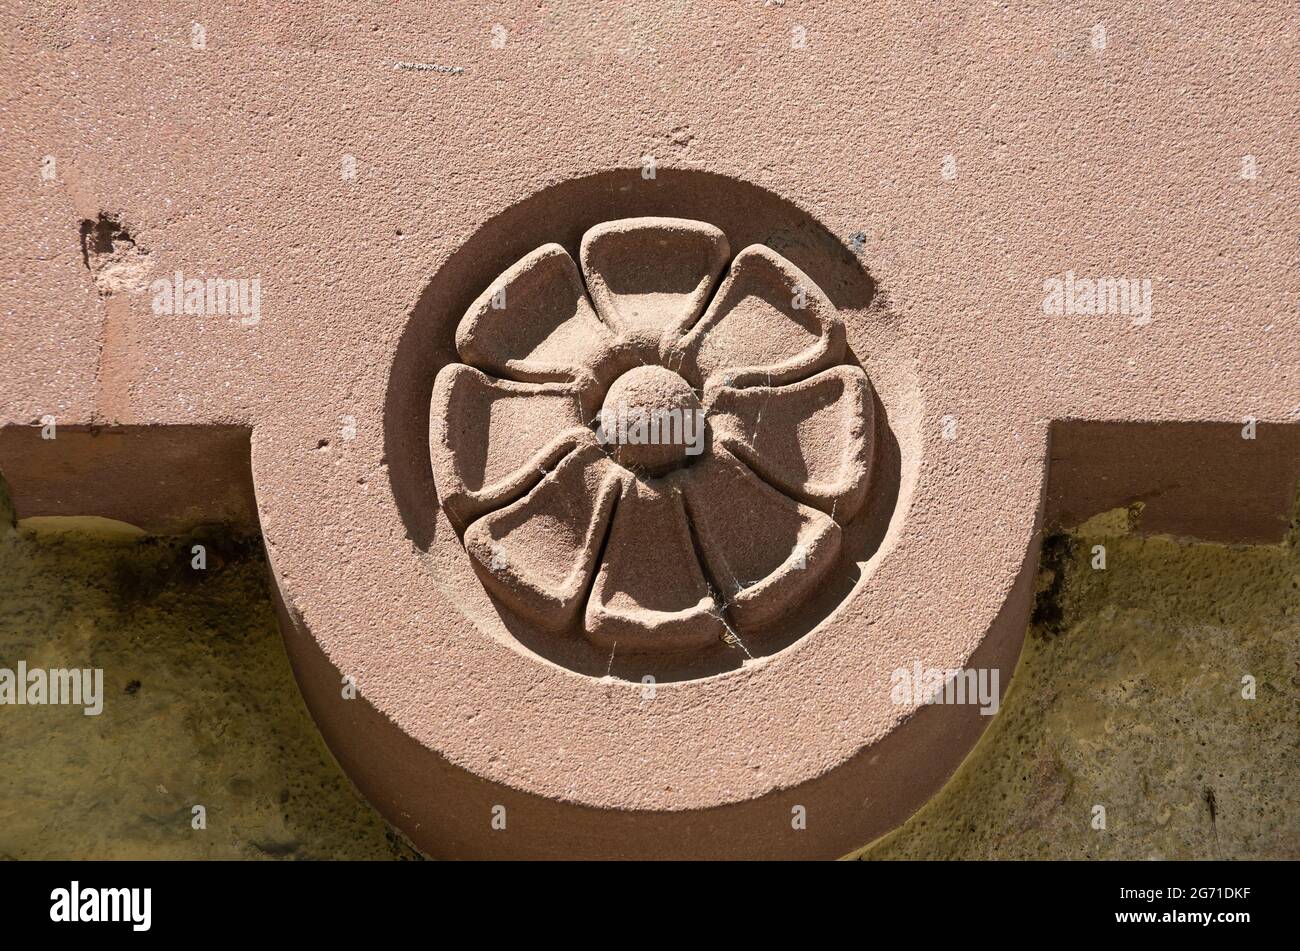 Architectural detail in the form of an ornament made of stone, Old Town of Tübingen, Baden-Württemberg, Germany. Stock Photo